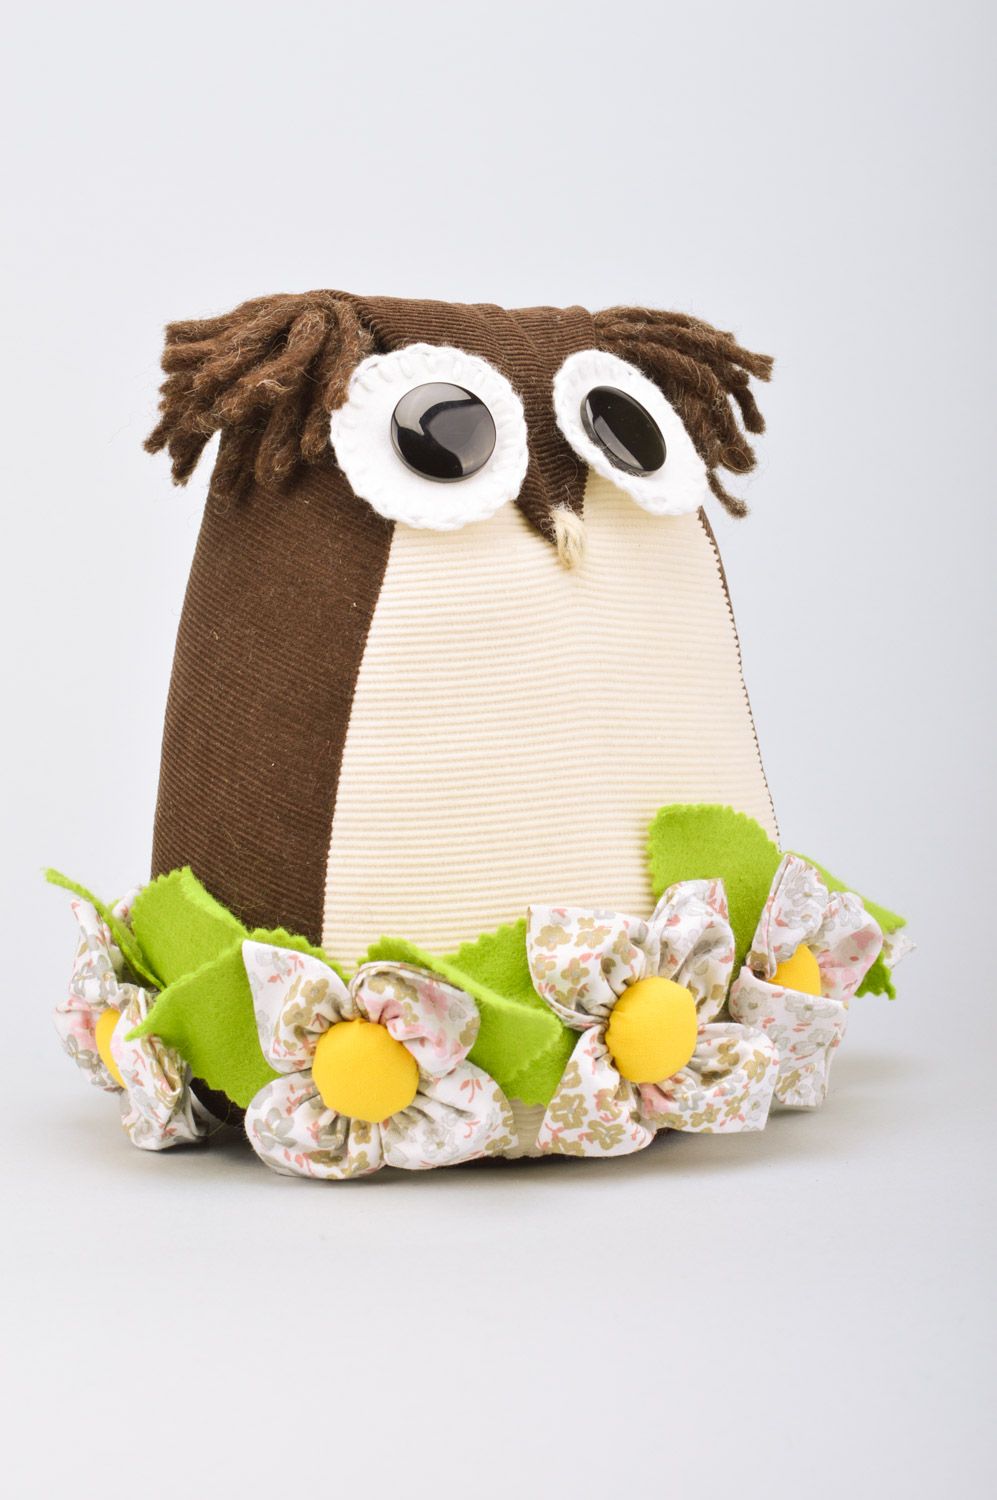 Handmade decorative door stopper toy Owl sewn of cotton and filled with sand photo 2